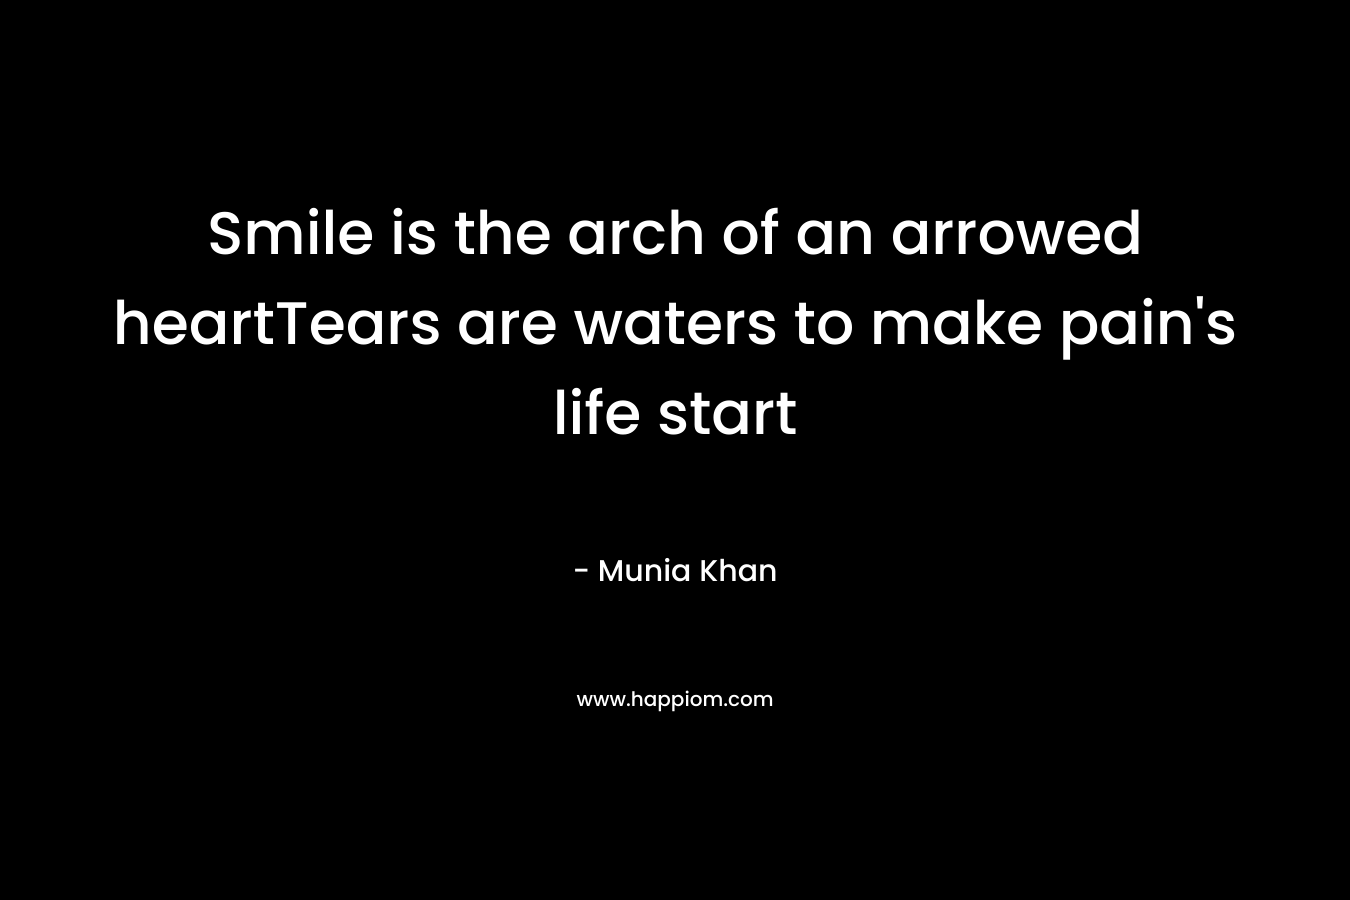 Smile is the arch of an arrowed heartTears are waters to make pain's life start